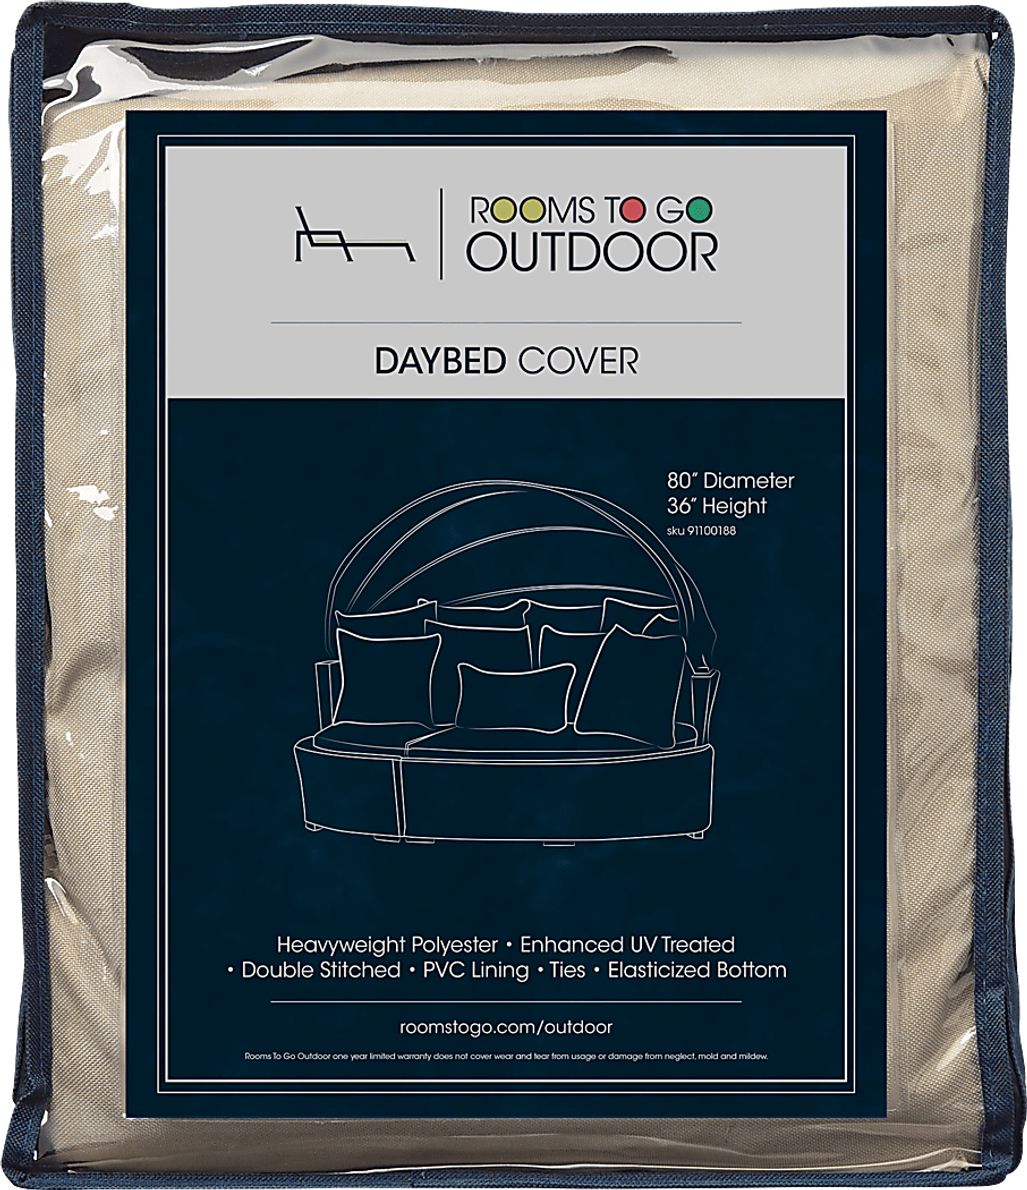 Patio Daybed Cover